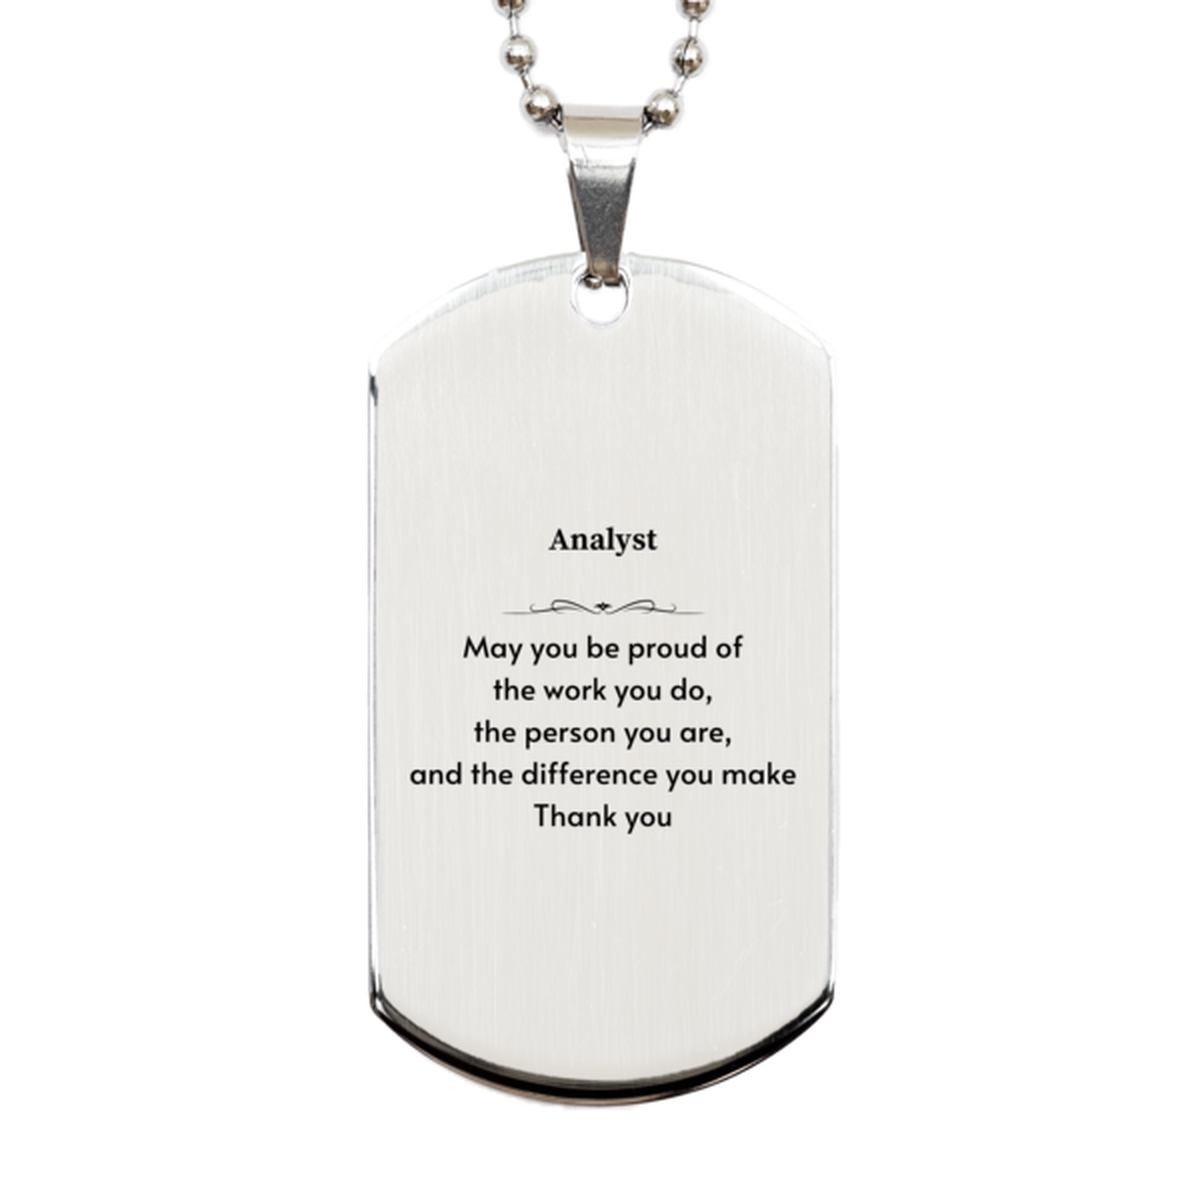 Heartwarming Silver Dog Tag Retirement Coworkers Gifts for Analyst, Analyst May You be proud of the work you do, the person you are Gifts for Boss Men Women Friends